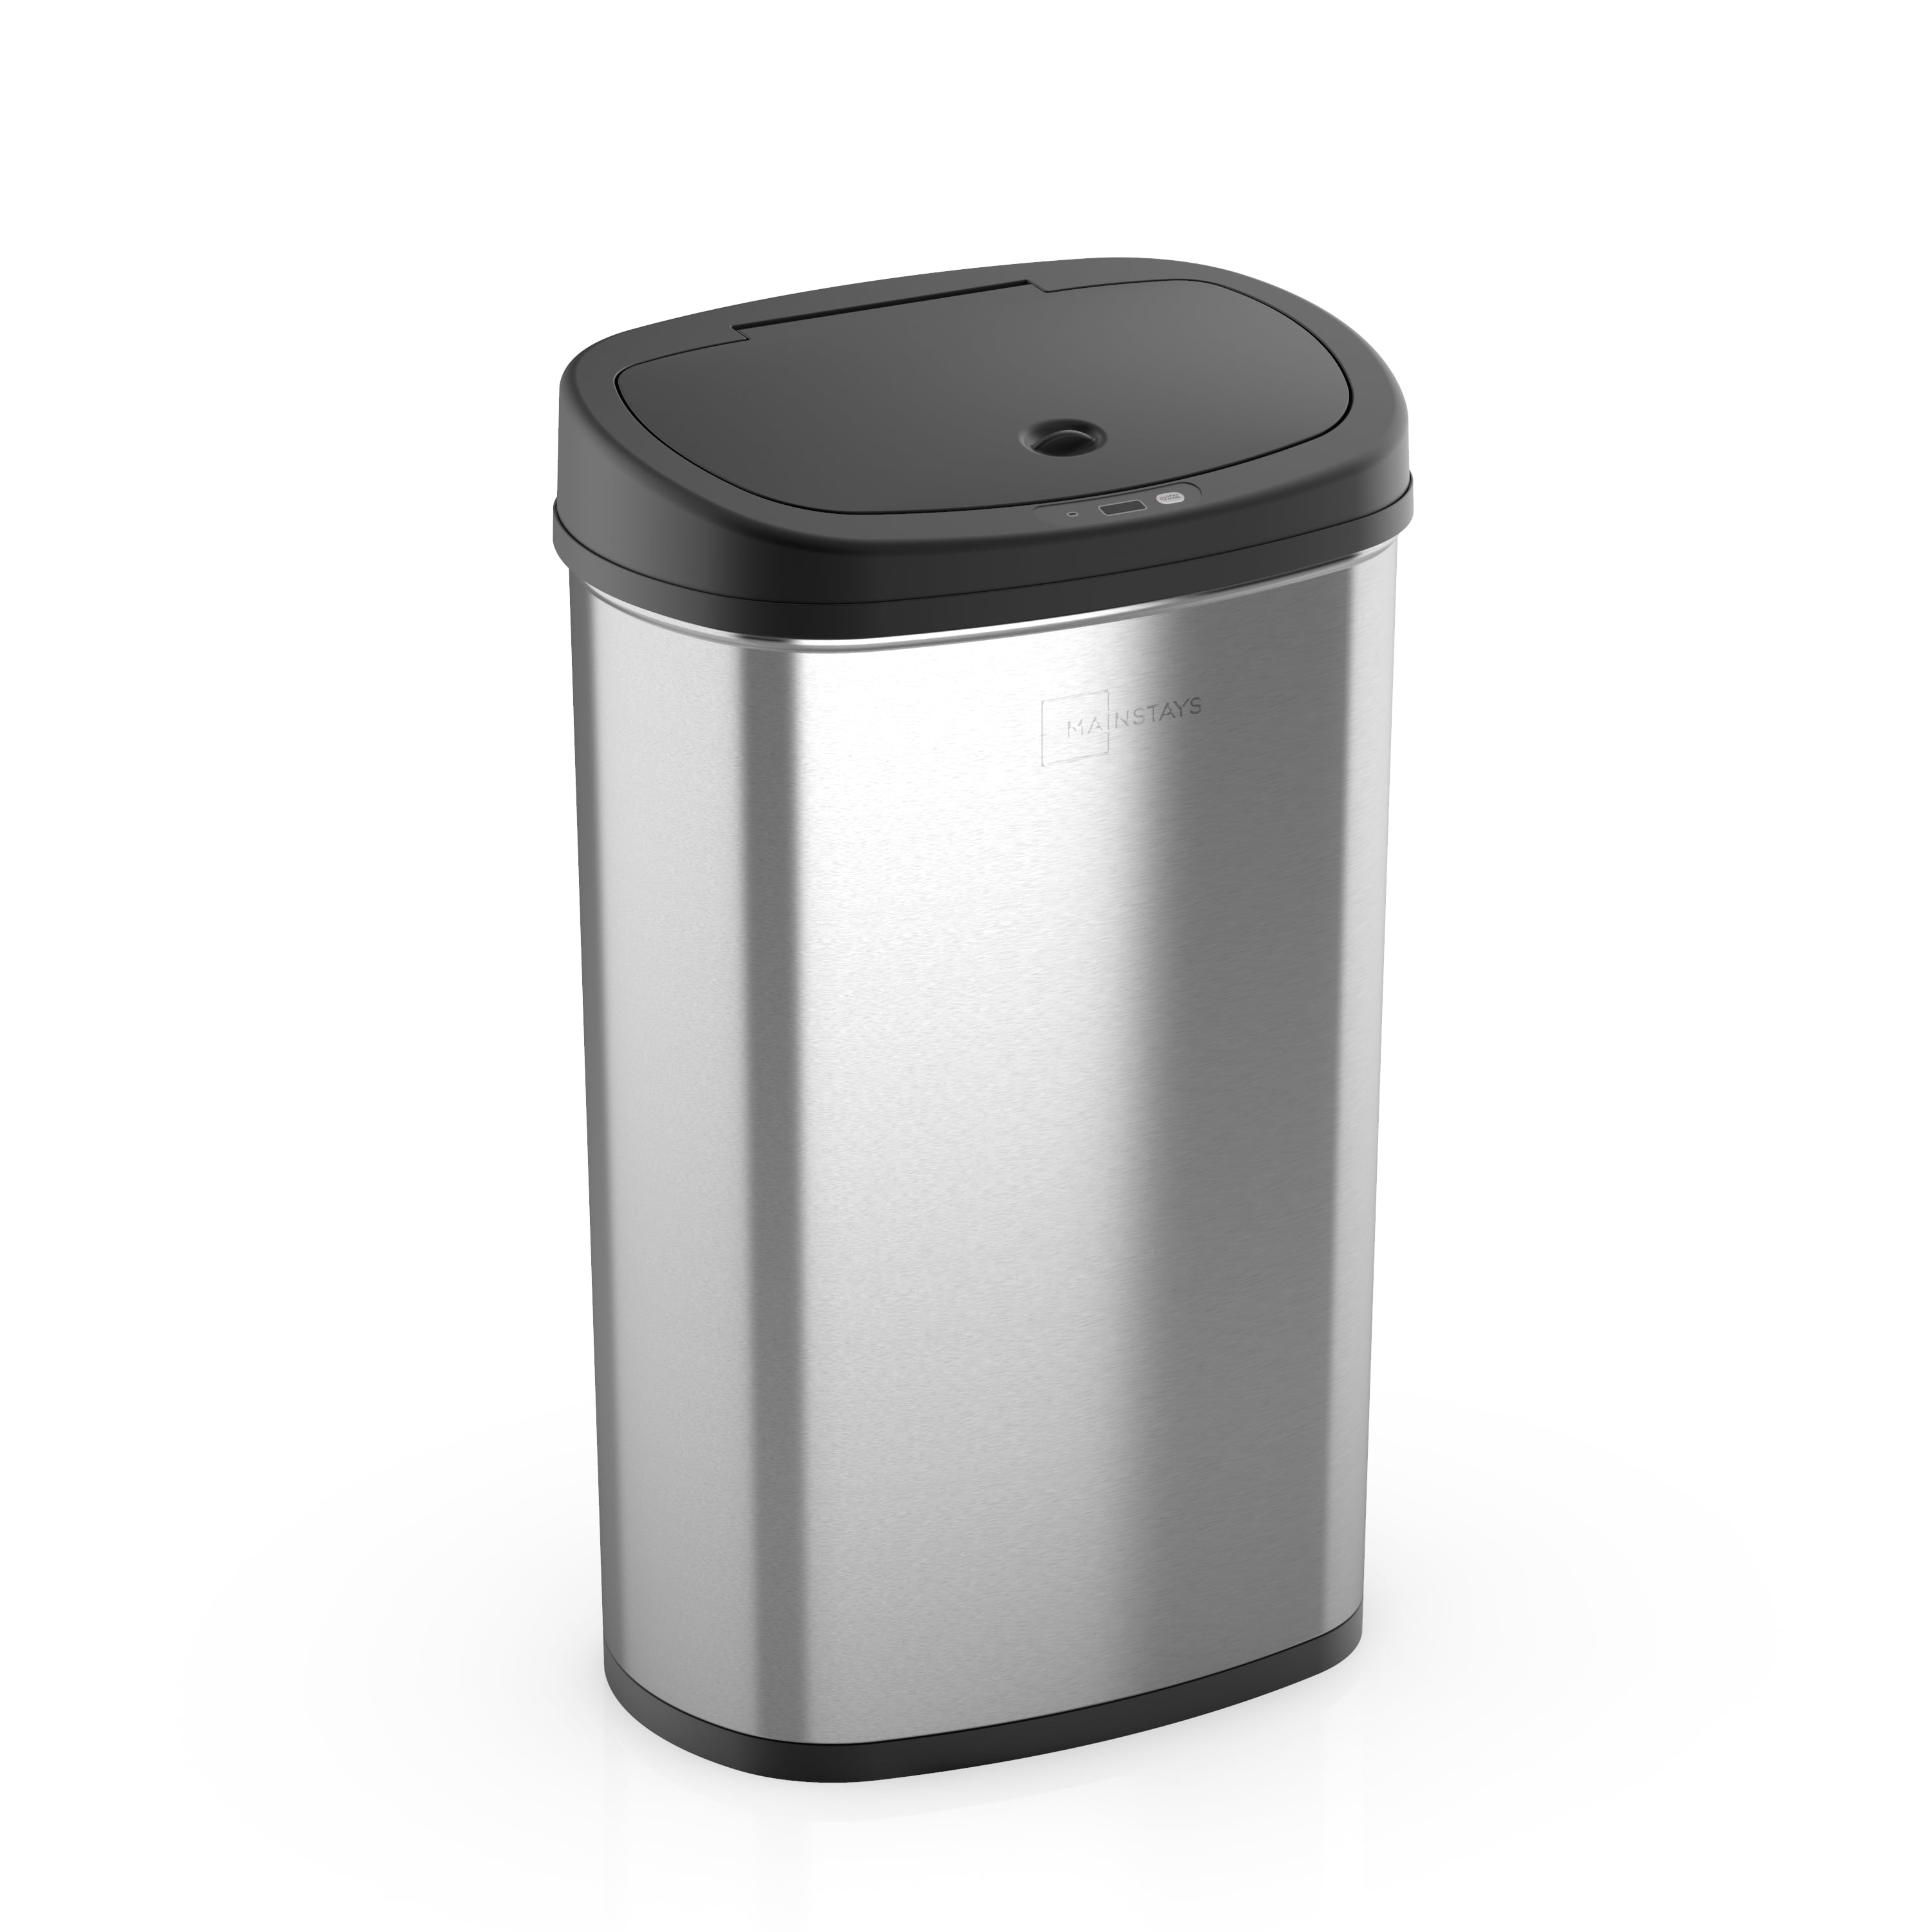 Mainstays 13.2 Gallon Trash Can, Motion Sensor Kitchen Trash Can, Stainless Steel